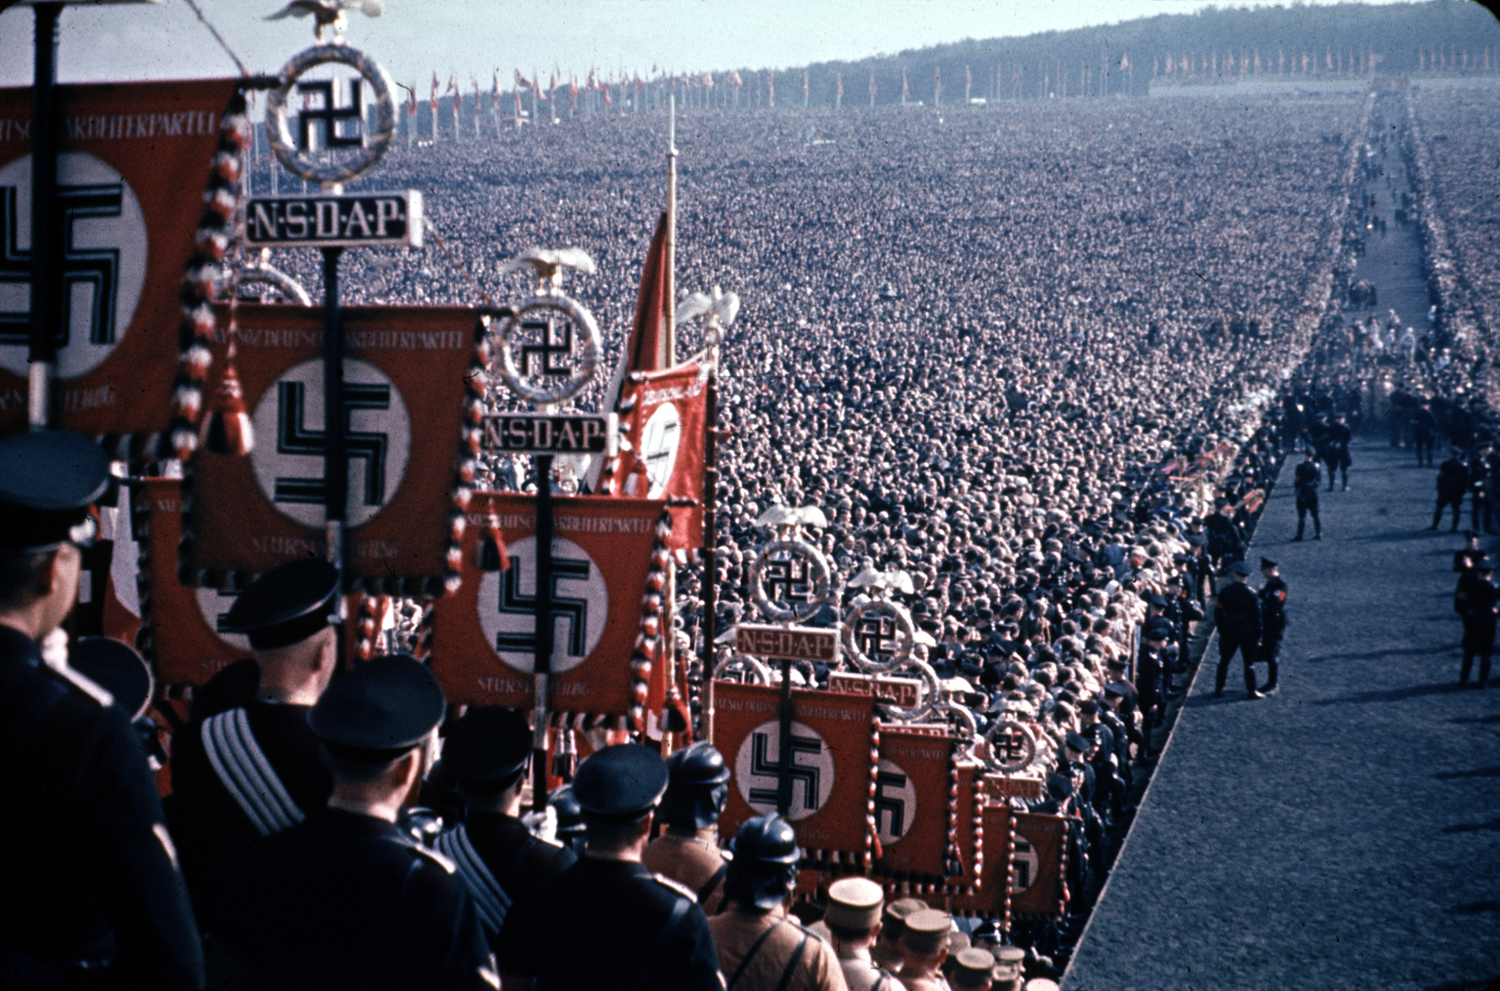 Hundreds of thousands gather at a harvest festival and Nazi Party rally in Germany, 1937.